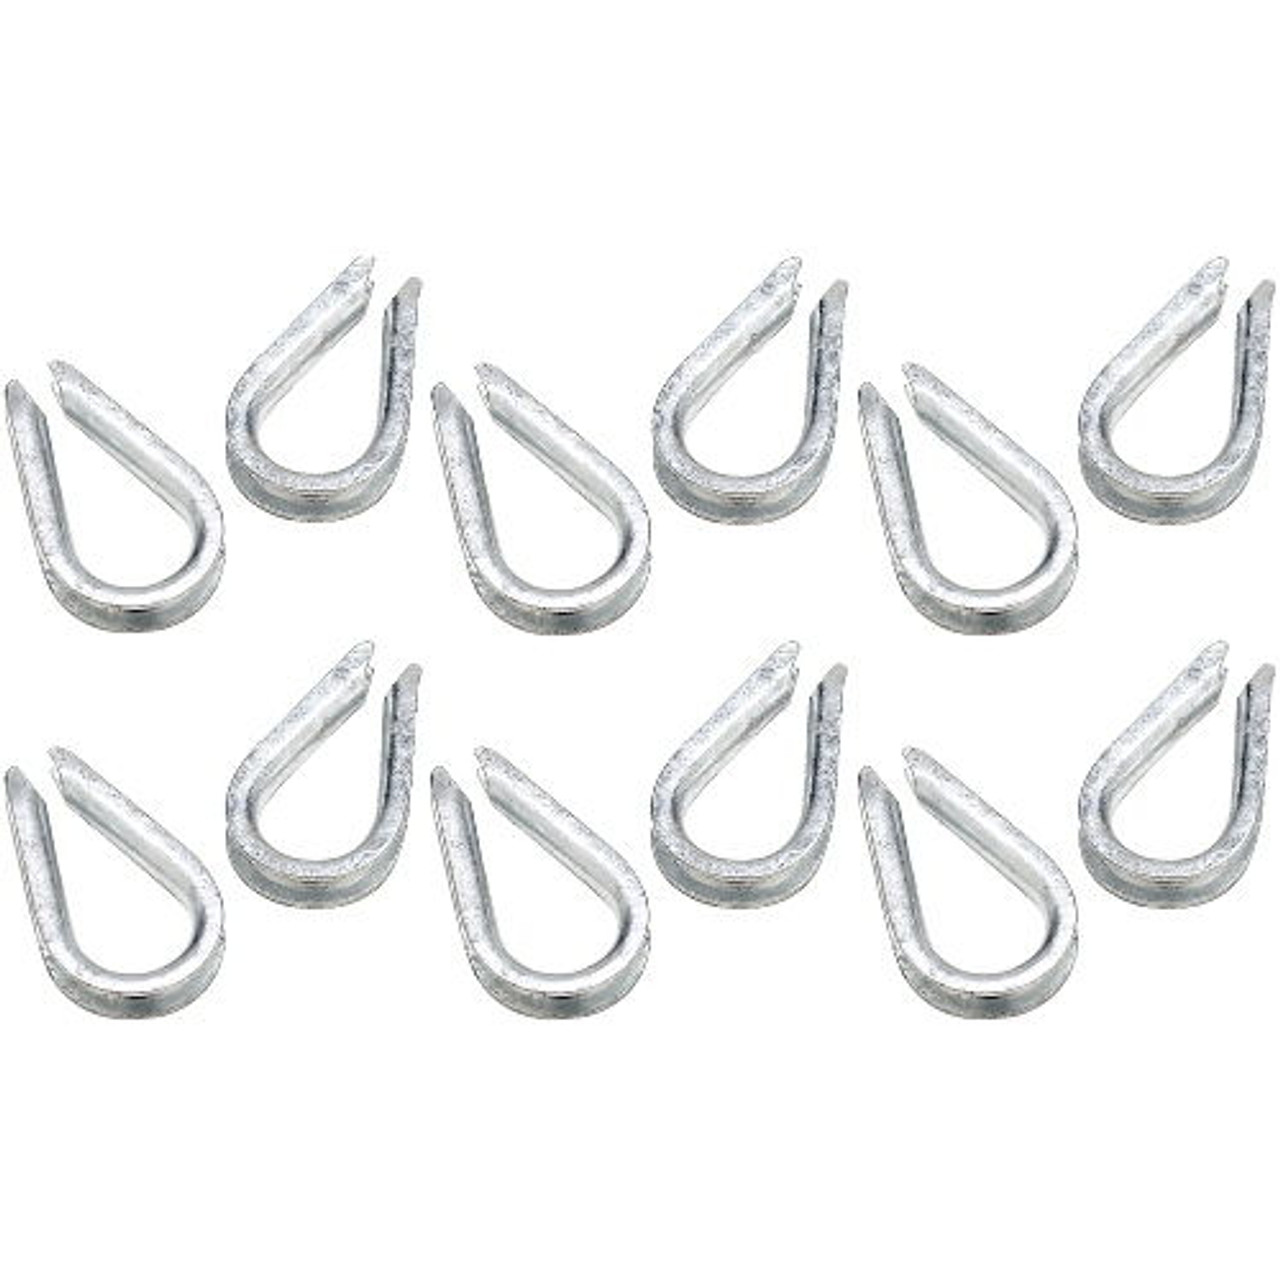 12 Pack of 3/8 Inch Galvanized Wire Rope Anchor Line Thimbles for Boats